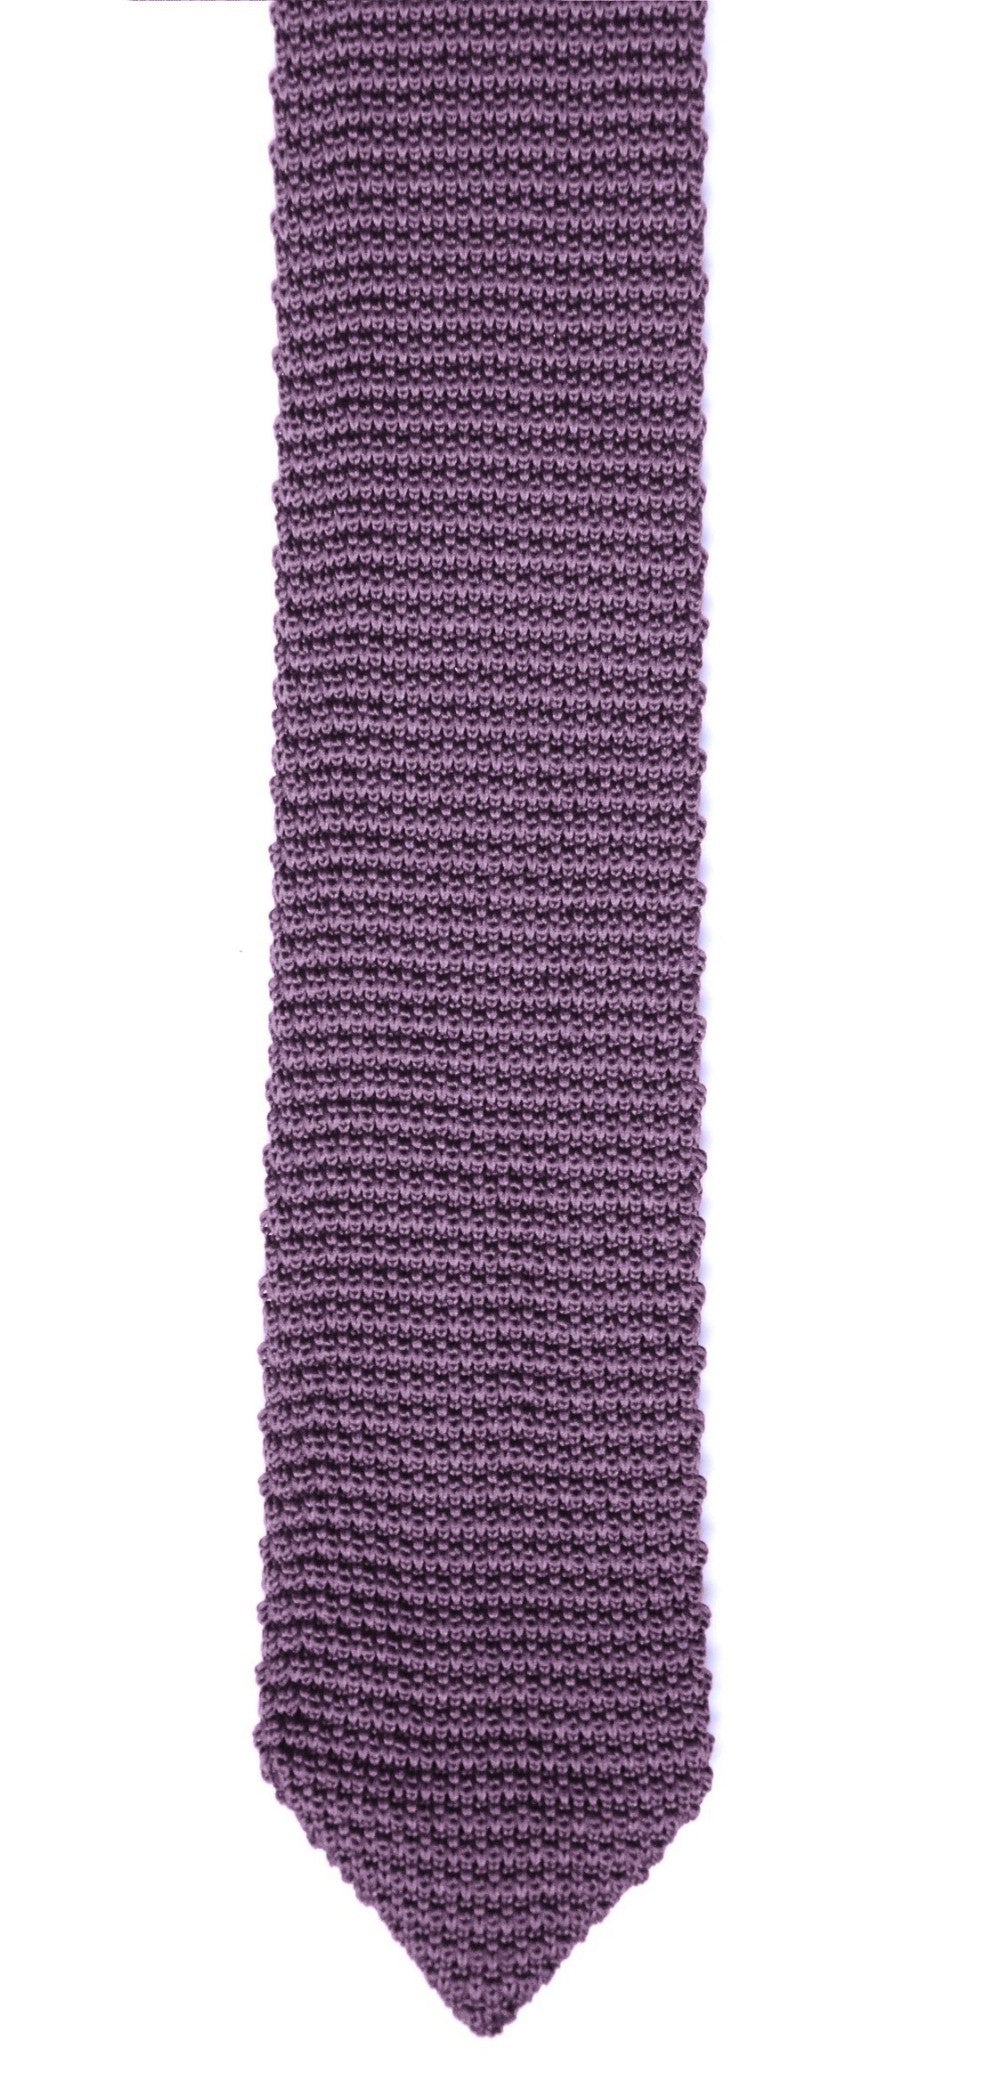 A modern Classic Purple Knit Tie against a white background.